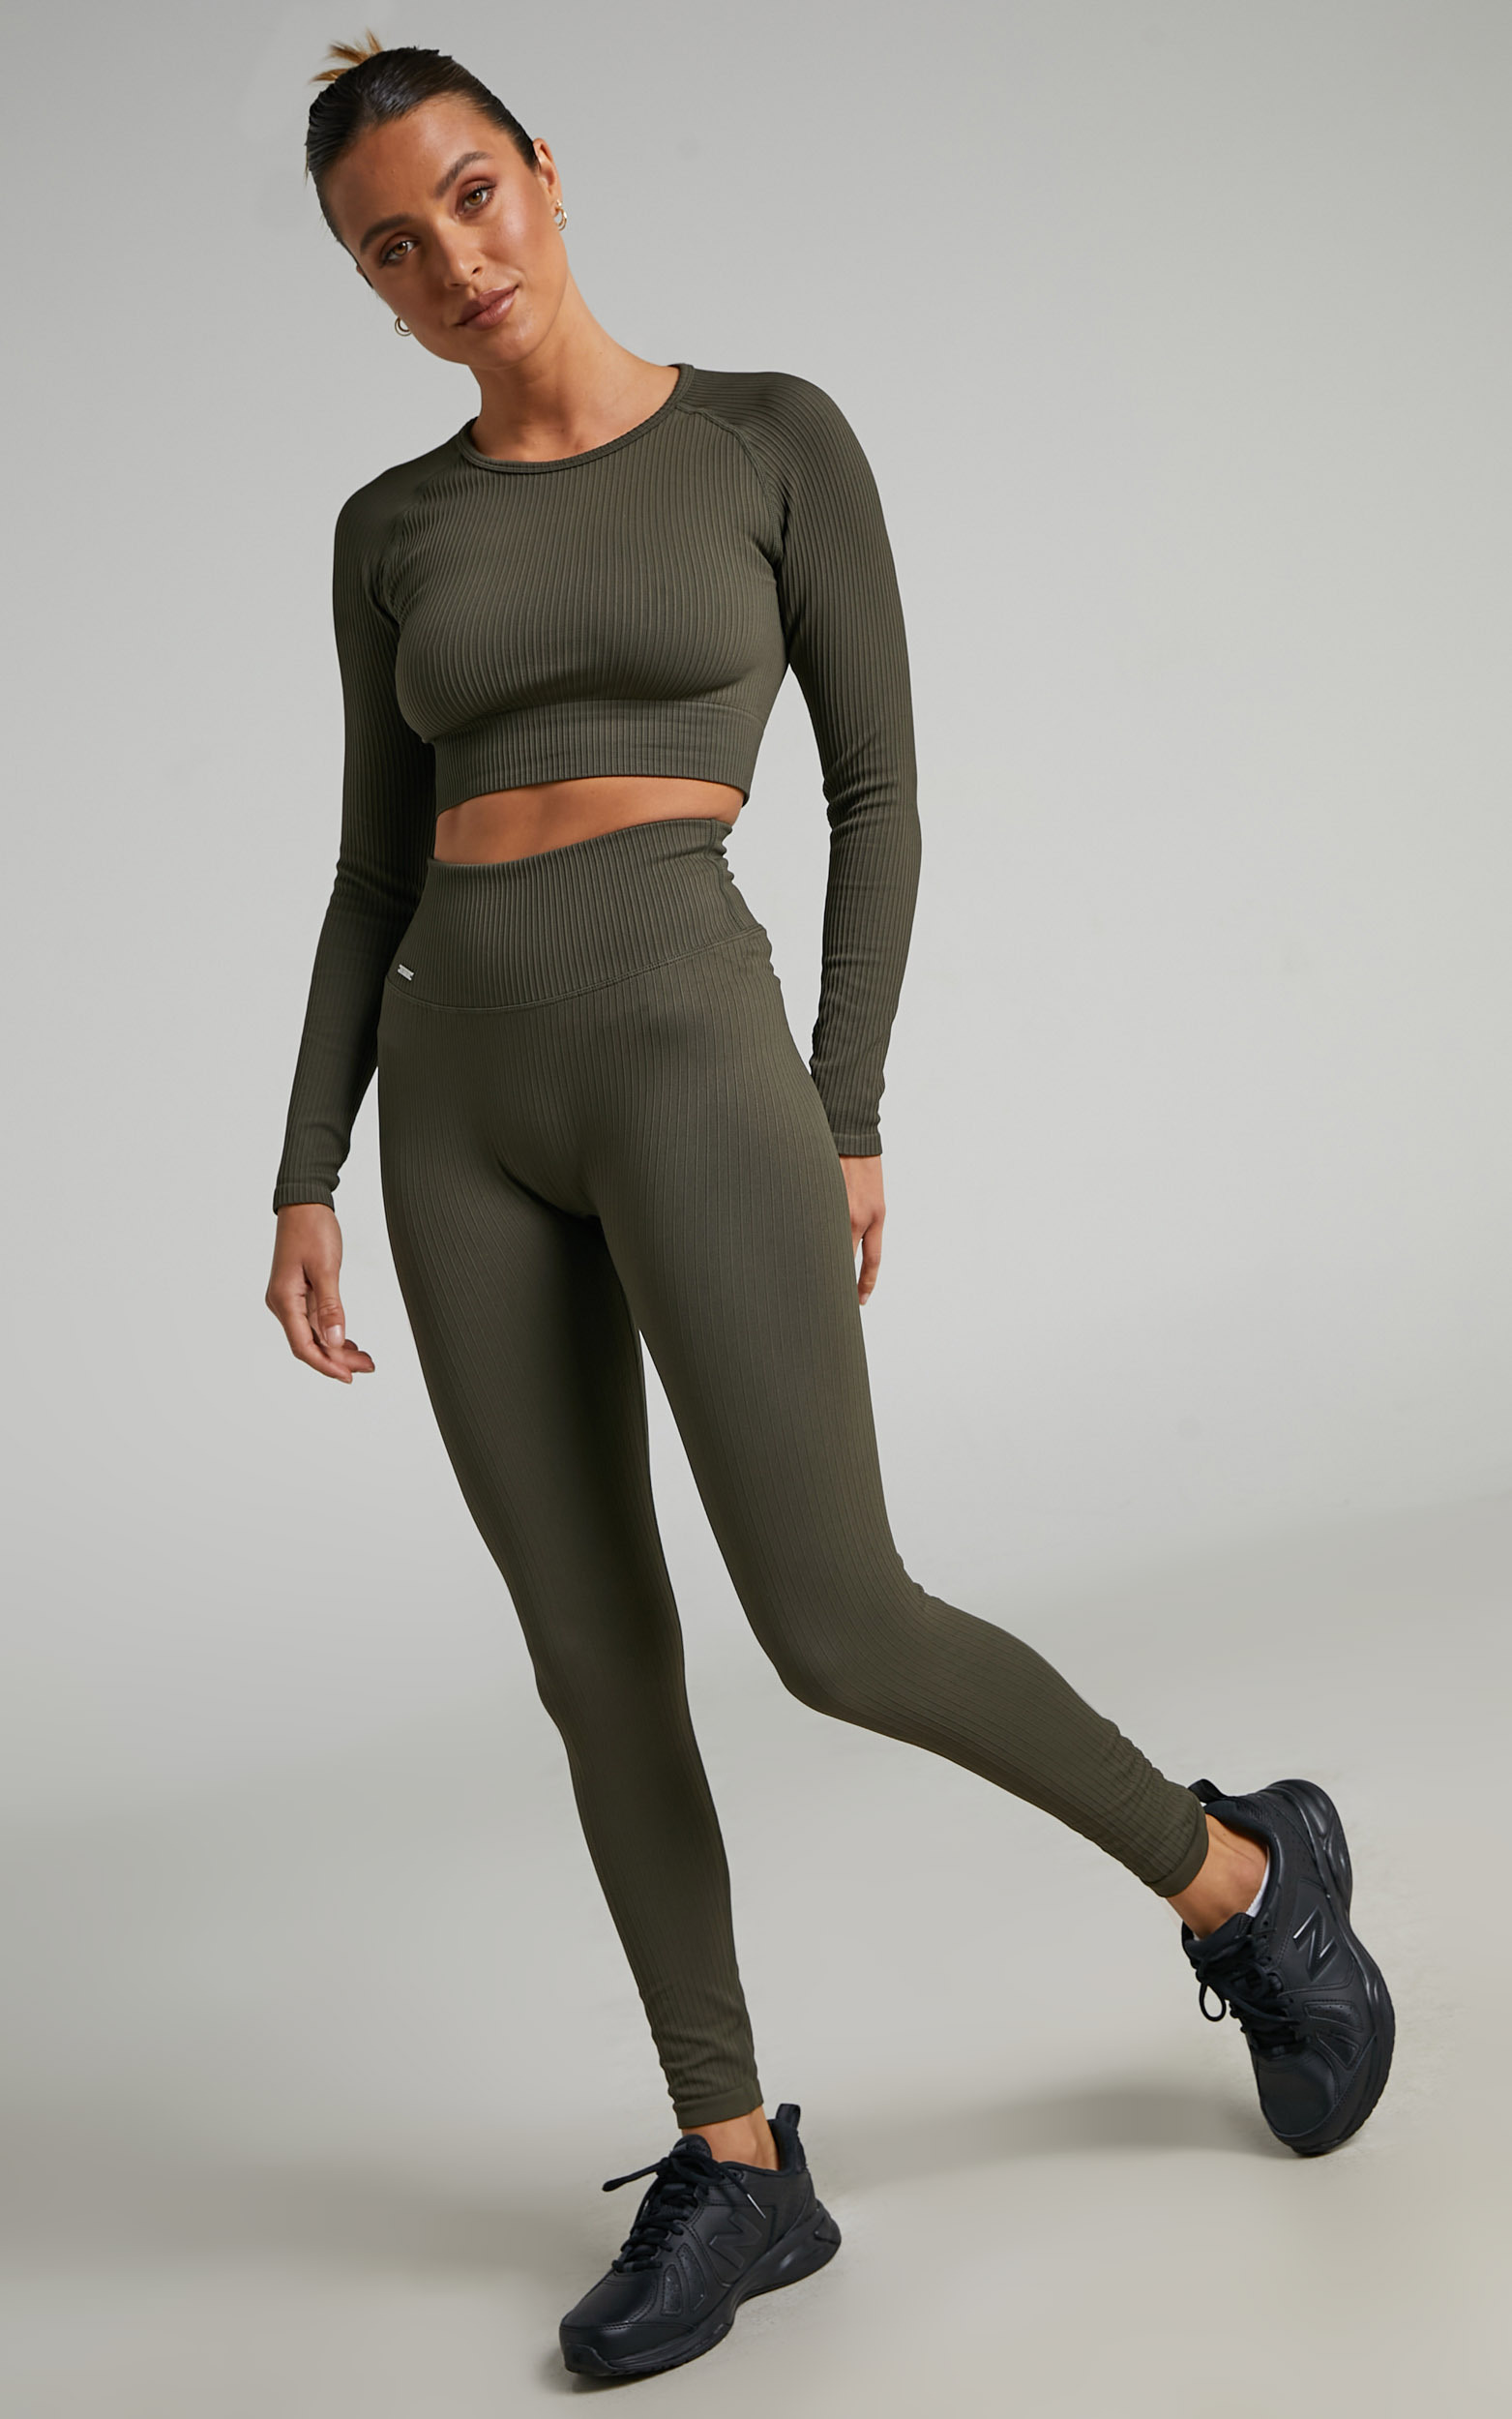 Aim'n - RIBBED SEAMLESS TIGHTS in Khaki - XS, GRN1, hi-res image number null